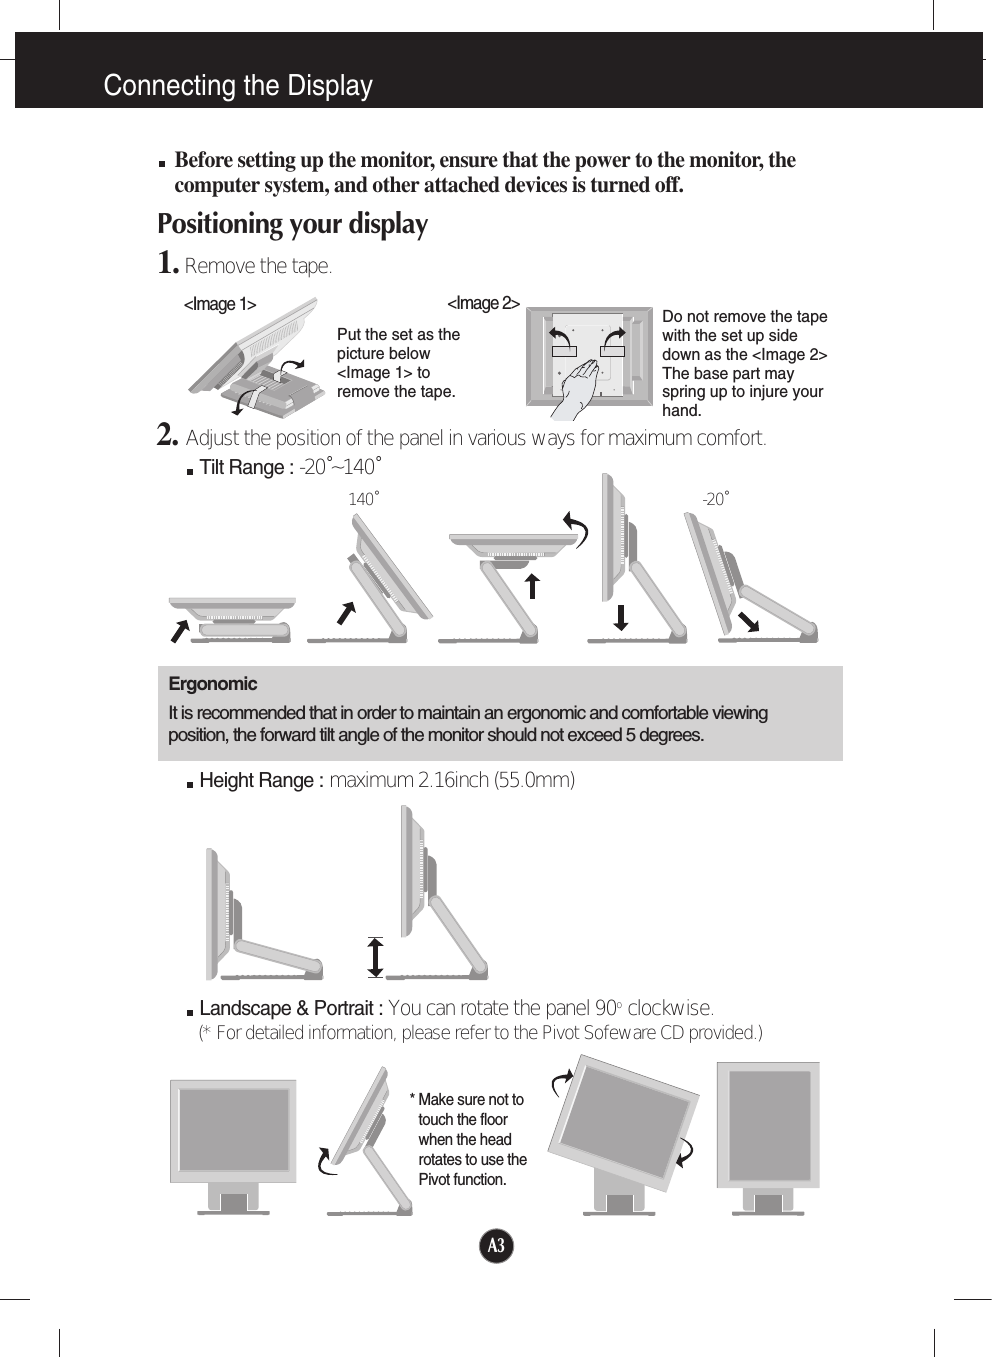 A3Connecting the DisplayBefore setting up the monitor, ensure that the power to the monitor, thecomputer system, and other attached devices is turned off. Positioning your display1. Remove the tape.ErgonomicIt is recommended that in order to maintain an ergonomic and comfortable viewingposition, the forward tilt angle of the monitor should not exceed 5 degrees.Height Range : maximum 2.16inch (55.0mm)Landscape &amp; Portrait : You can rotate the panel 90o  clockwise. (* For detailed information, please refer to the Pivot Sofeware CD provided.)2. Adjust the position of the panel in various ways for maximum comfort.Tilt Range : -20˚~140˚140˚ -20˚* Make sure not totouch the floorwhen the headrotates to use thePivot function.&lt;Image 1&gt;Put the set as thepicture below&lt;Image 1&gt; toremove the tape. Do not remove the tapewith the set up sidedown as the &lt;Image 2&gt;The base part mayspring up to injure yourhand. &lt;Image 2&gt;